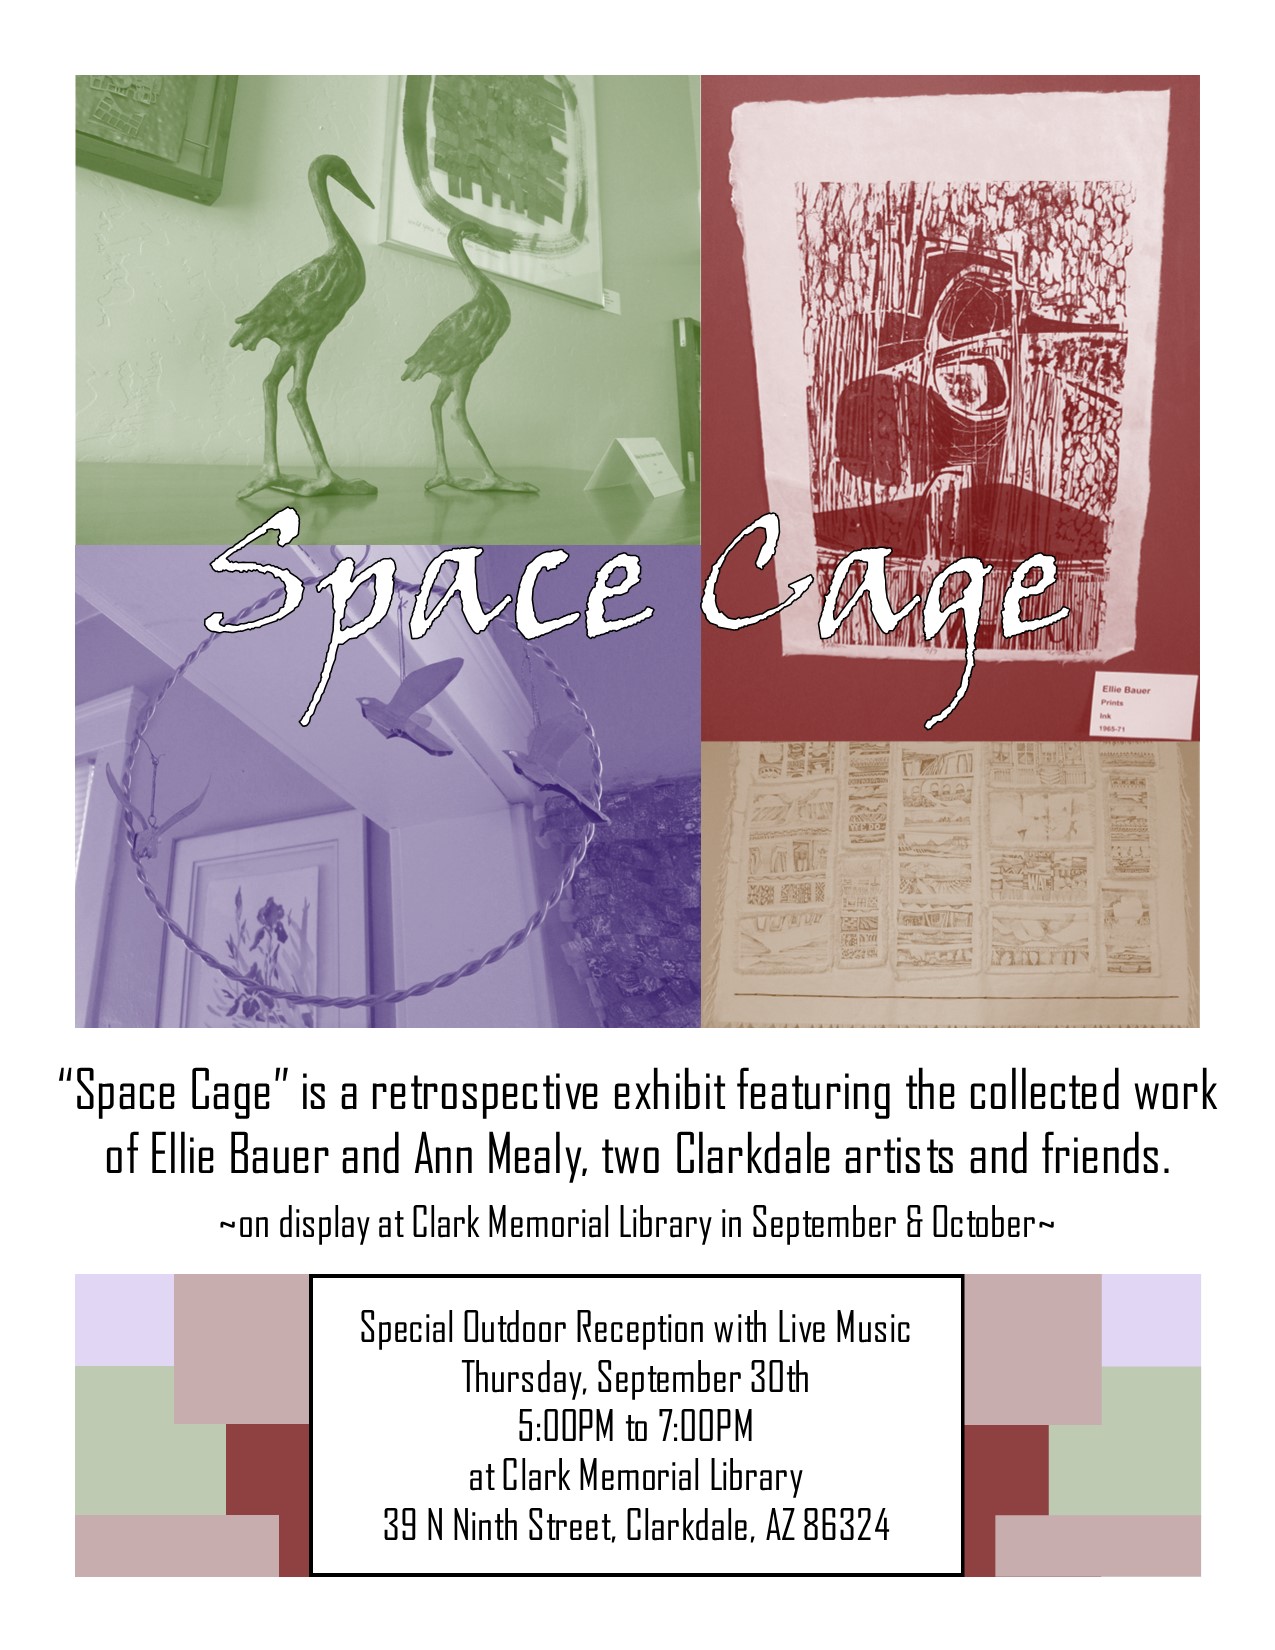 Four photos of materials from the exhibit tinted red, green purple, and brown with the text "Space Cage" over them. Text reads "“Space Cage” is a retrospective exhibit featuring the collected work of Ellie Bauer and Ann Mealy, two Clarkdale artists and friends. On display at Clark Memorial Library in September & October. Special Outdoor Reception with Live Music Thursday, September 30th 5:00PM to 7:00PM at Clark Memorial Library 39 N Ninth Street, Clarkdale, AZ 86324"